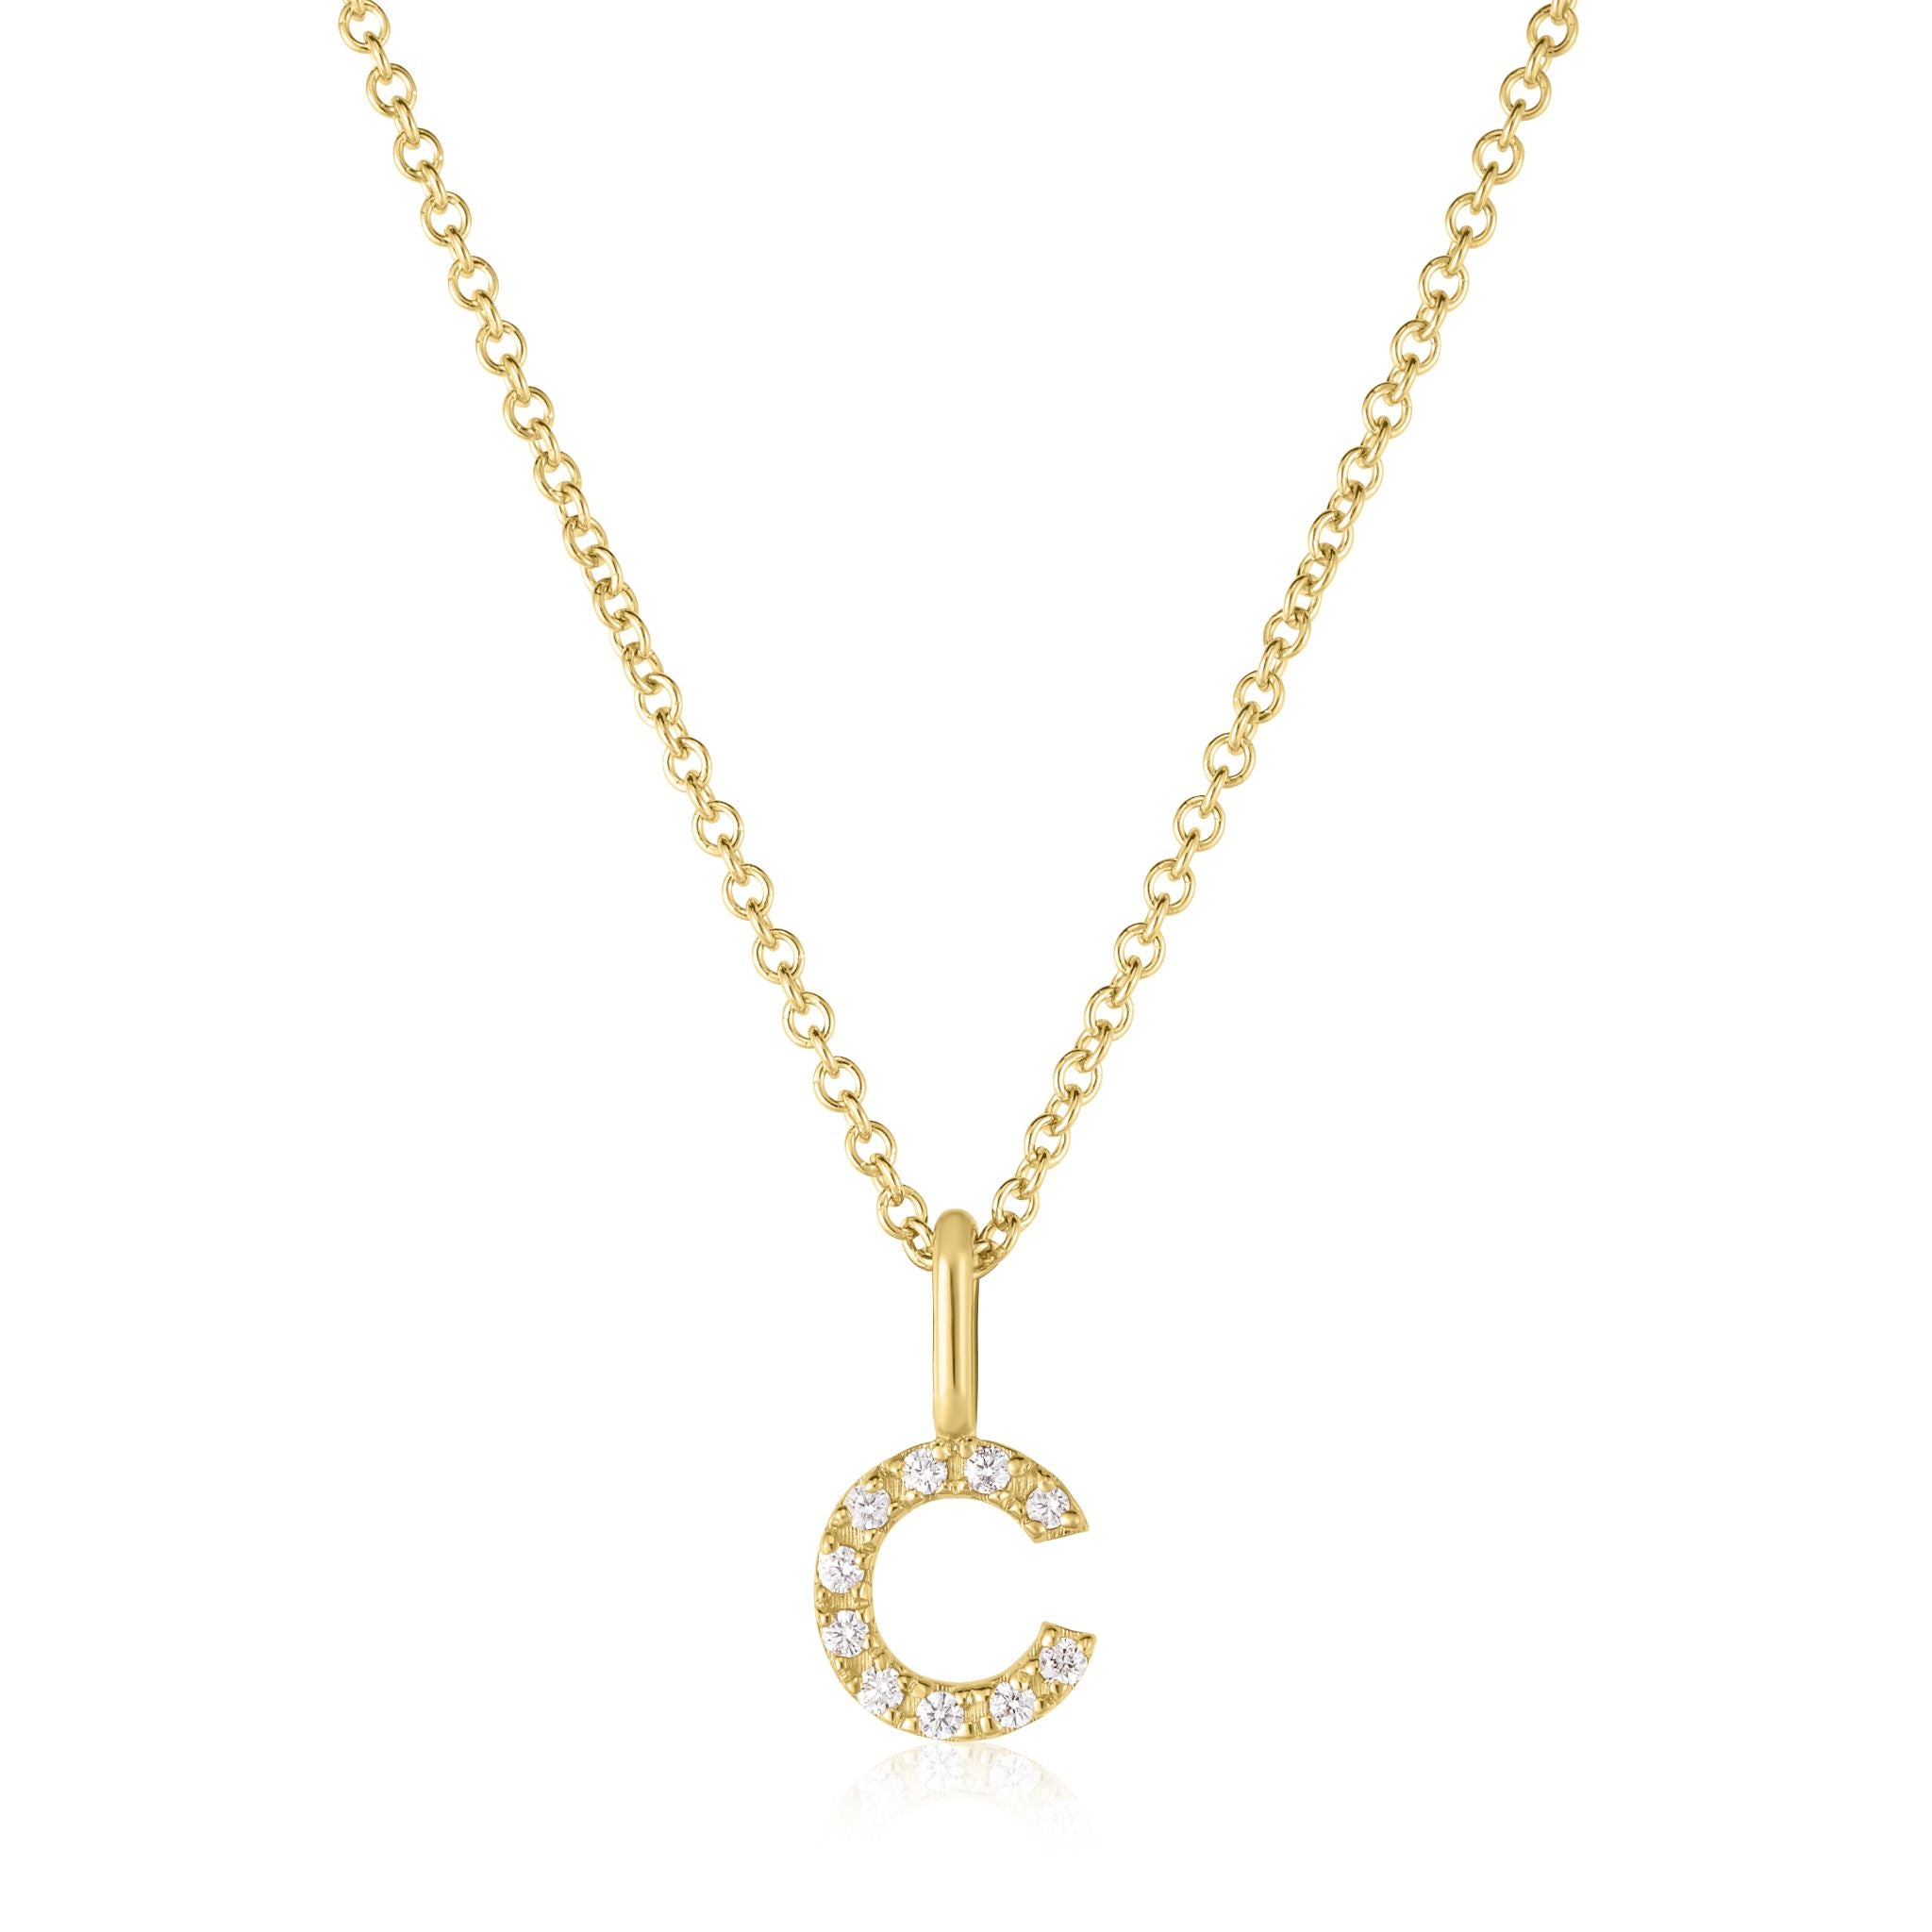 14K GOLD AND PAVE DIAMOND MINI INITIAL CHARM NECKLACE